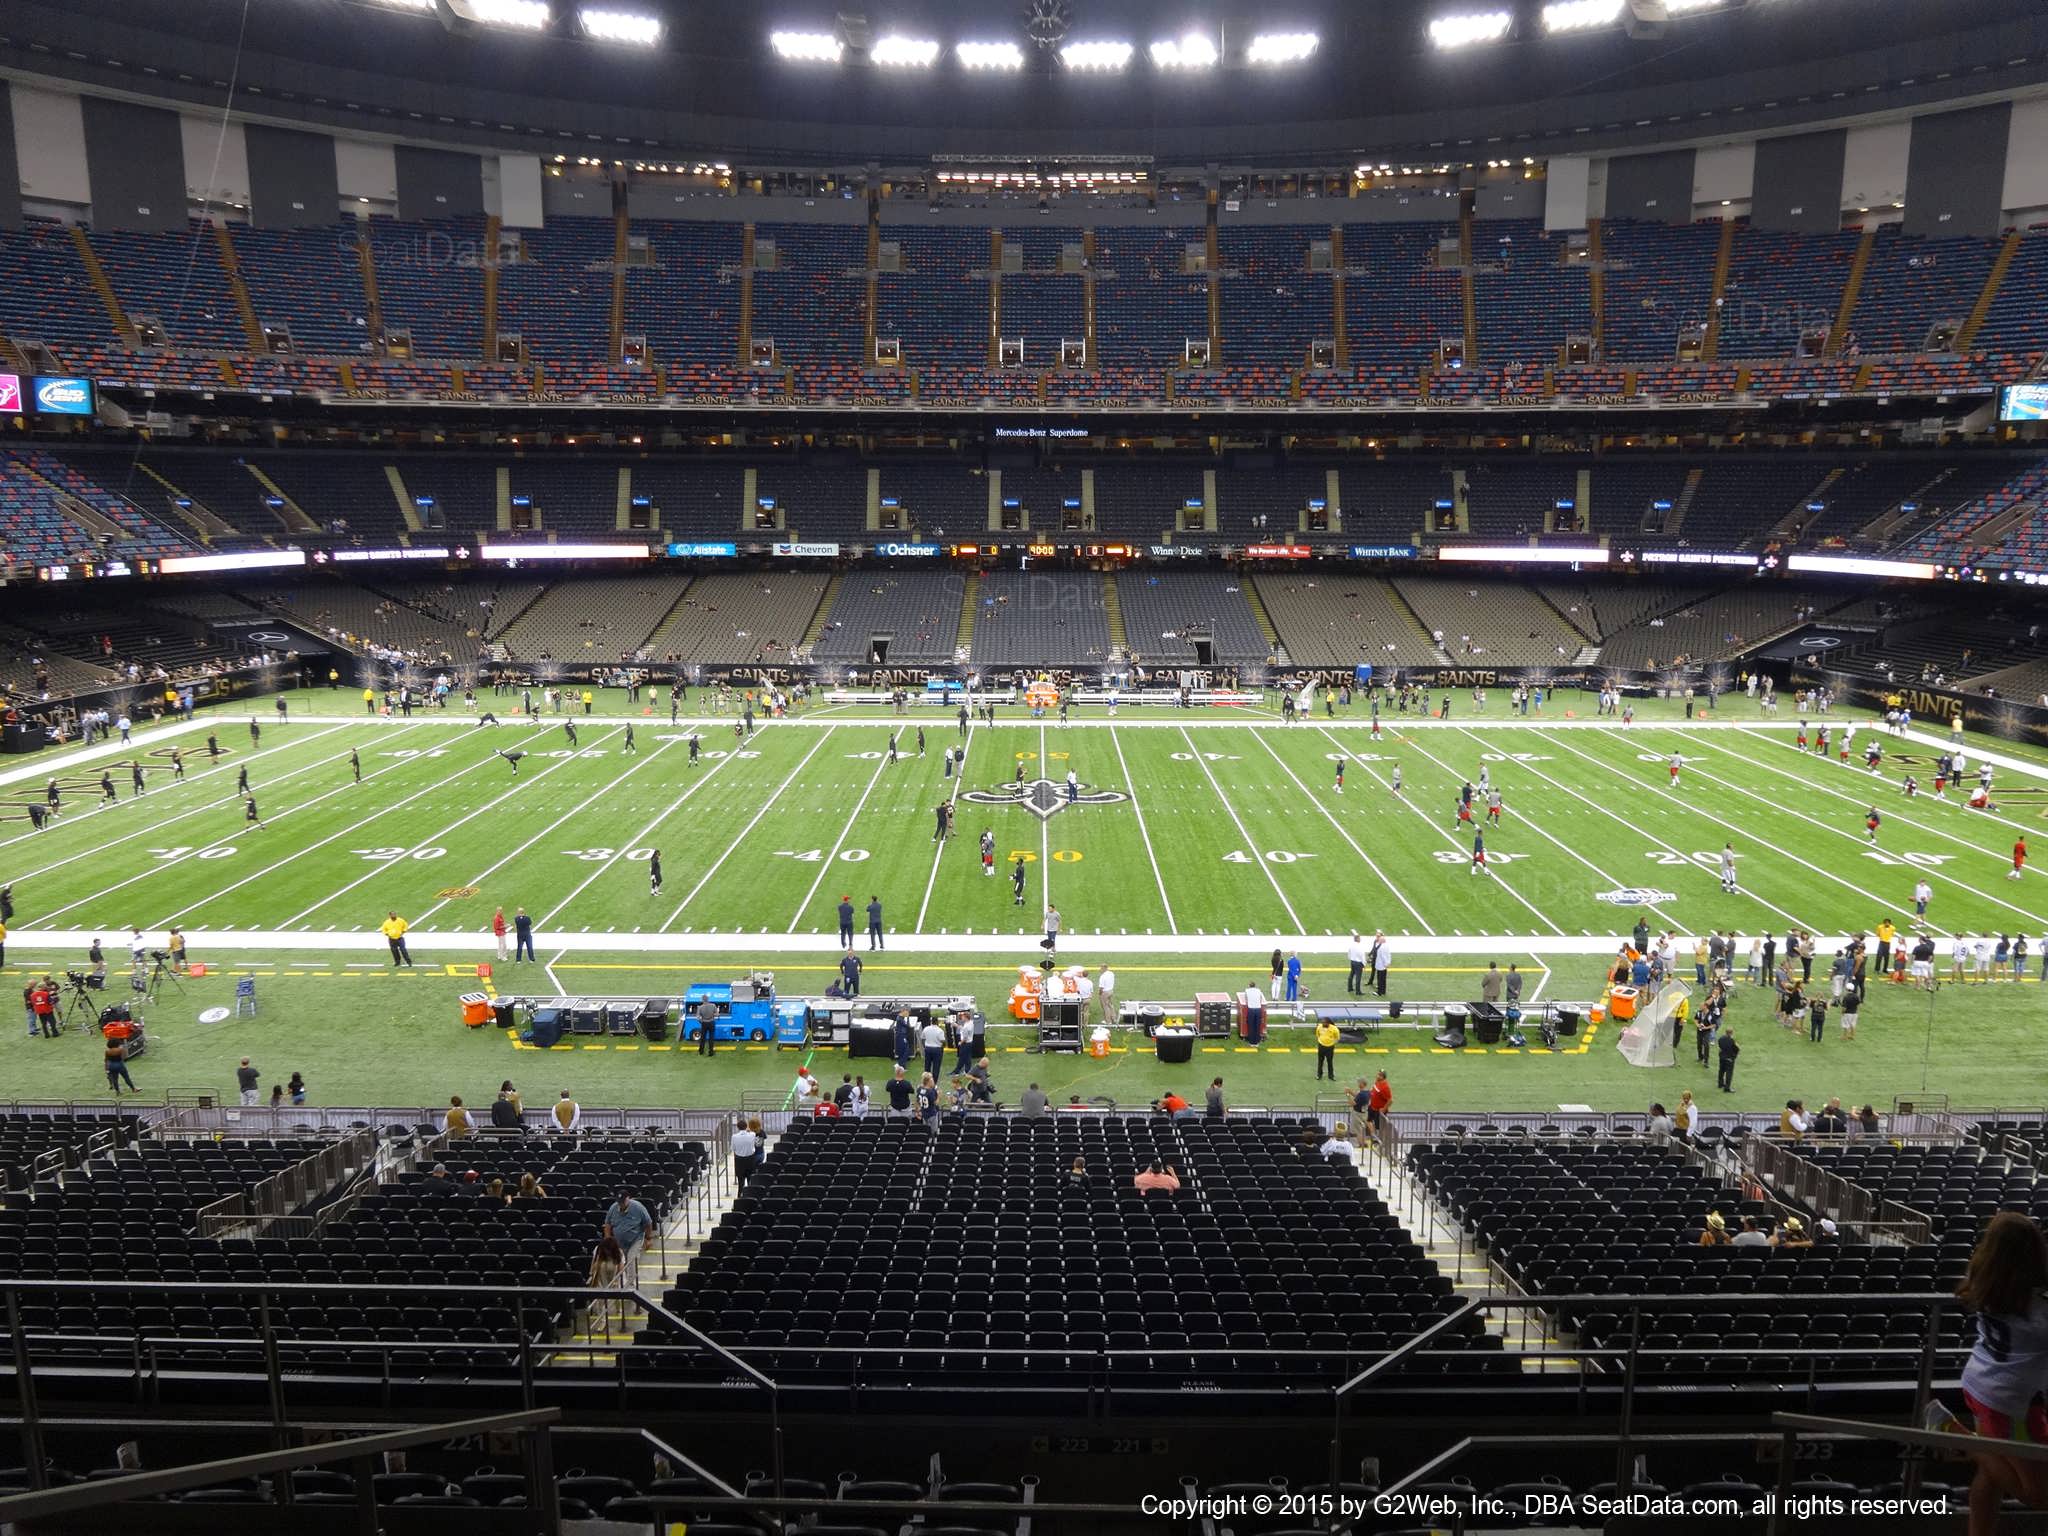 Seat view from section 312 at the Mercedes-Benz Superdome, home of the New Orleans Saints